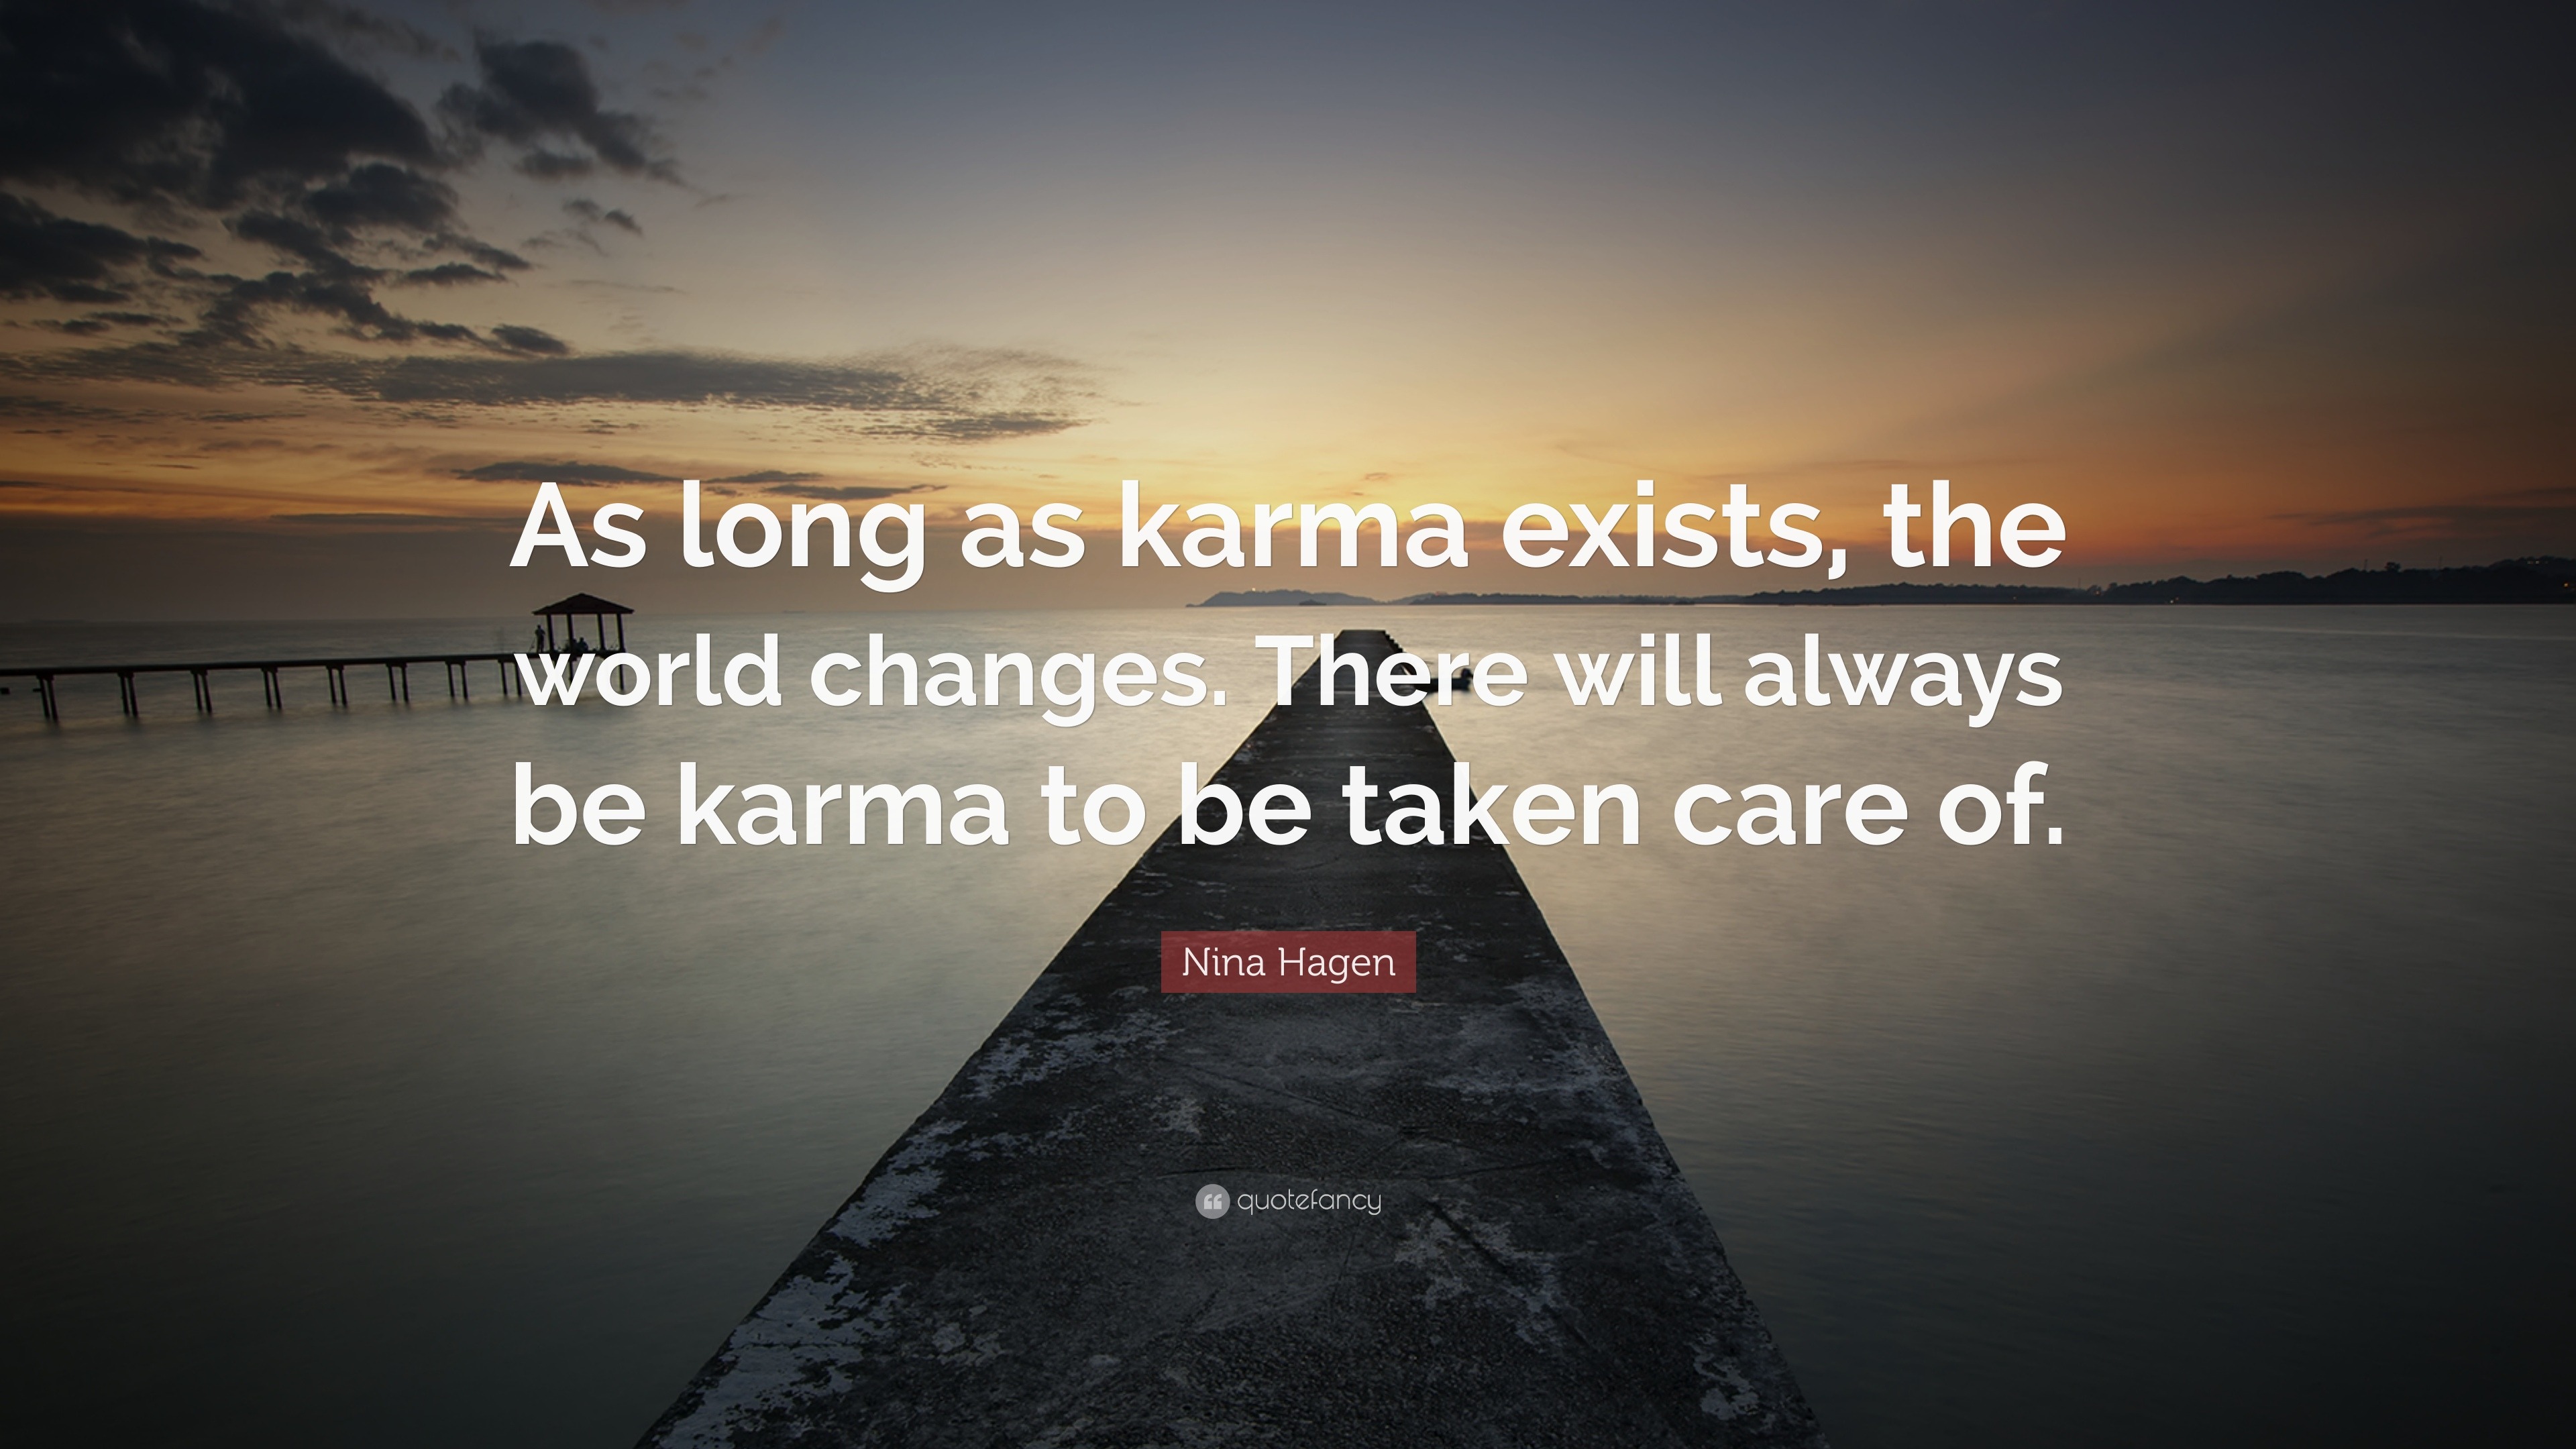 Nina Hagen Quote: “As long as karma exists, the world changes. There ...